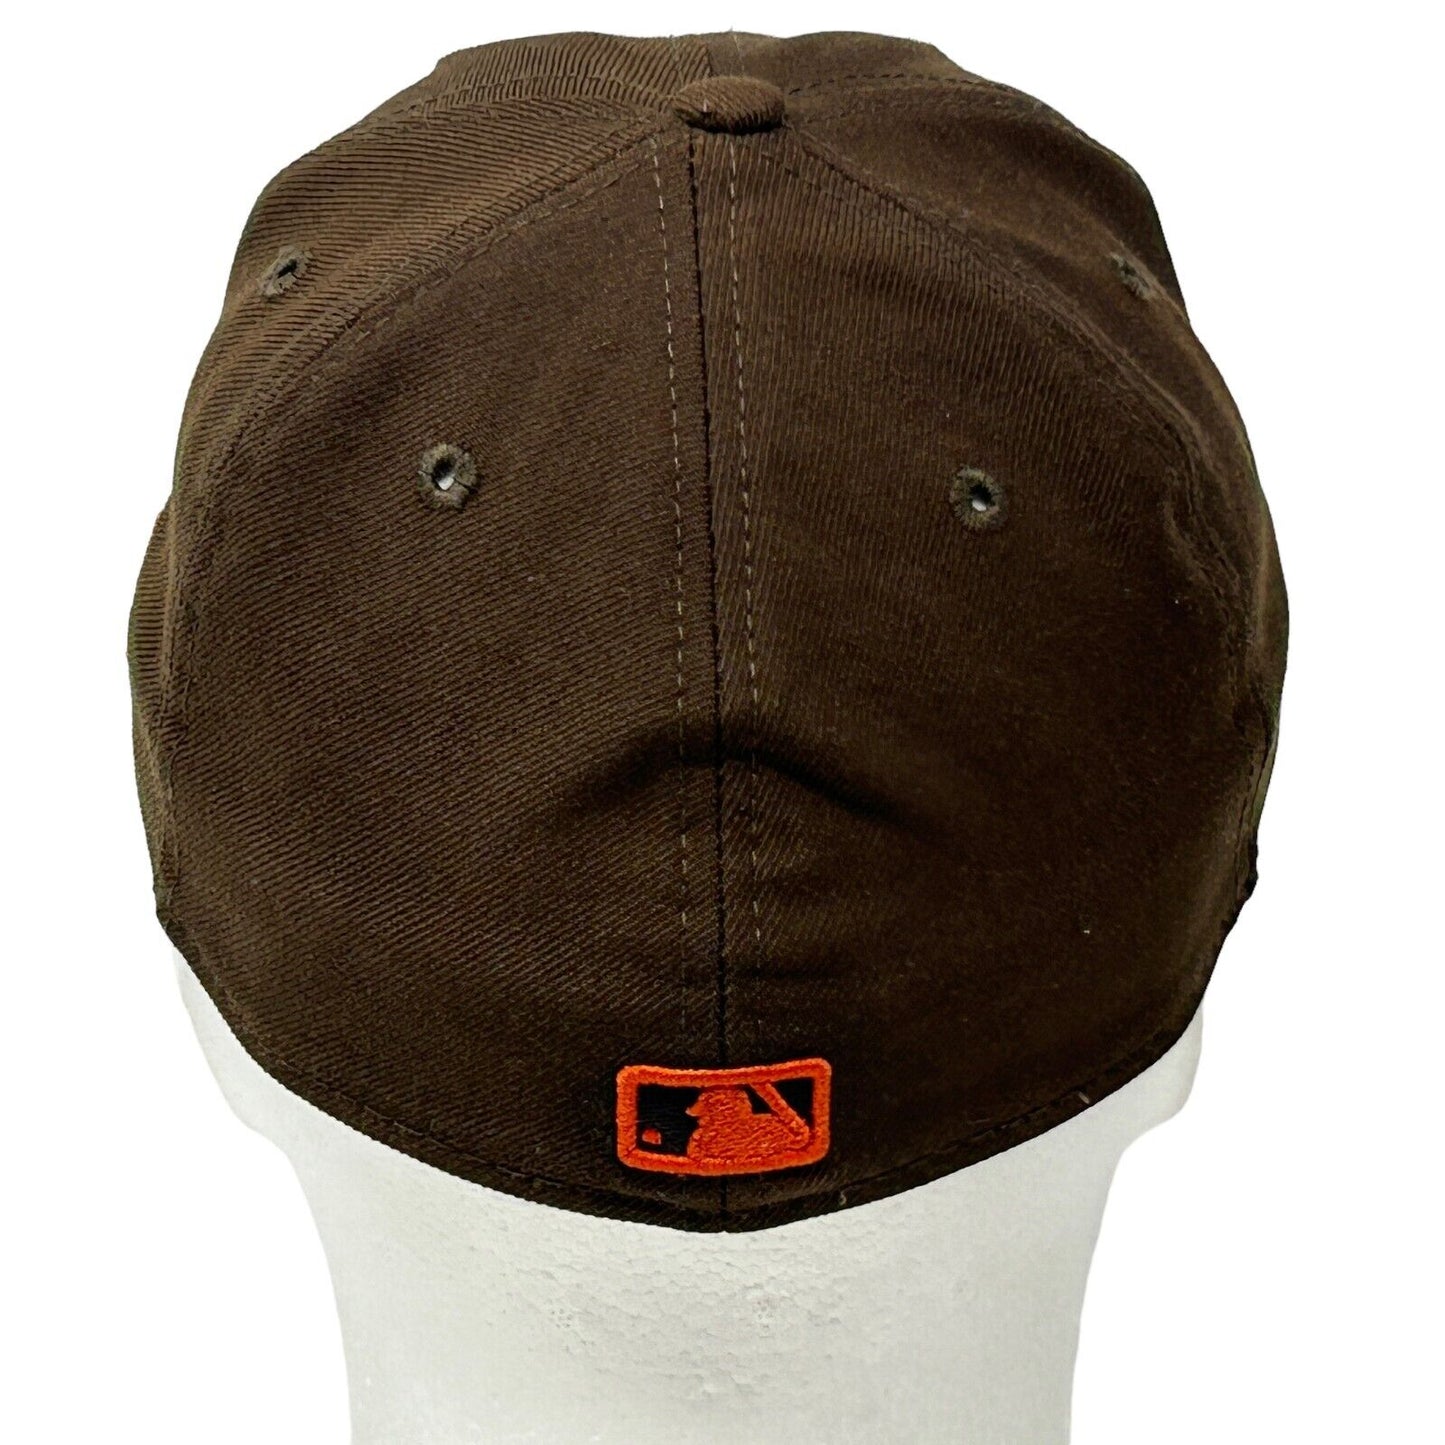 San Diego SD Padres Wool Hat Brown New Era Made In USA Baseball Cap Fitted 7 1/4